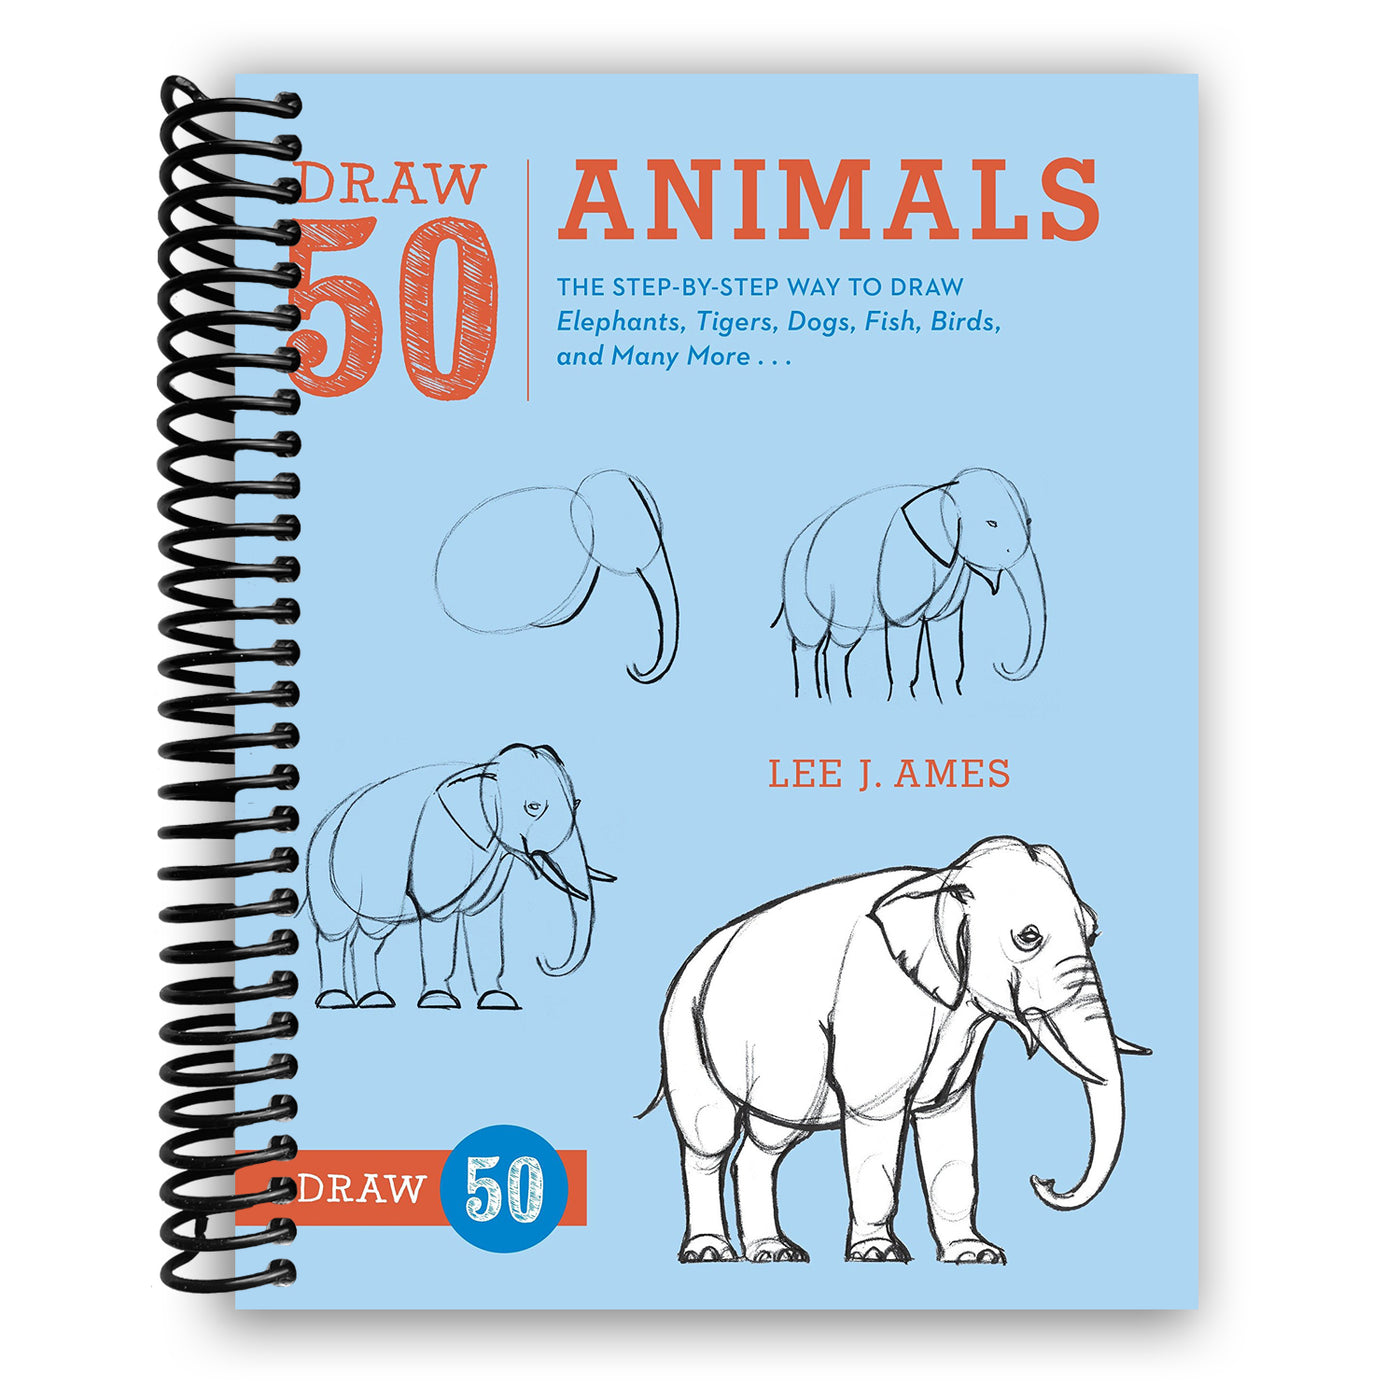 Draw 50 Animals: The Step-by-Step Way to Draw Elephants, Tigers, Dogs, Fish, Birds, and Many More… (Spiral Bound)